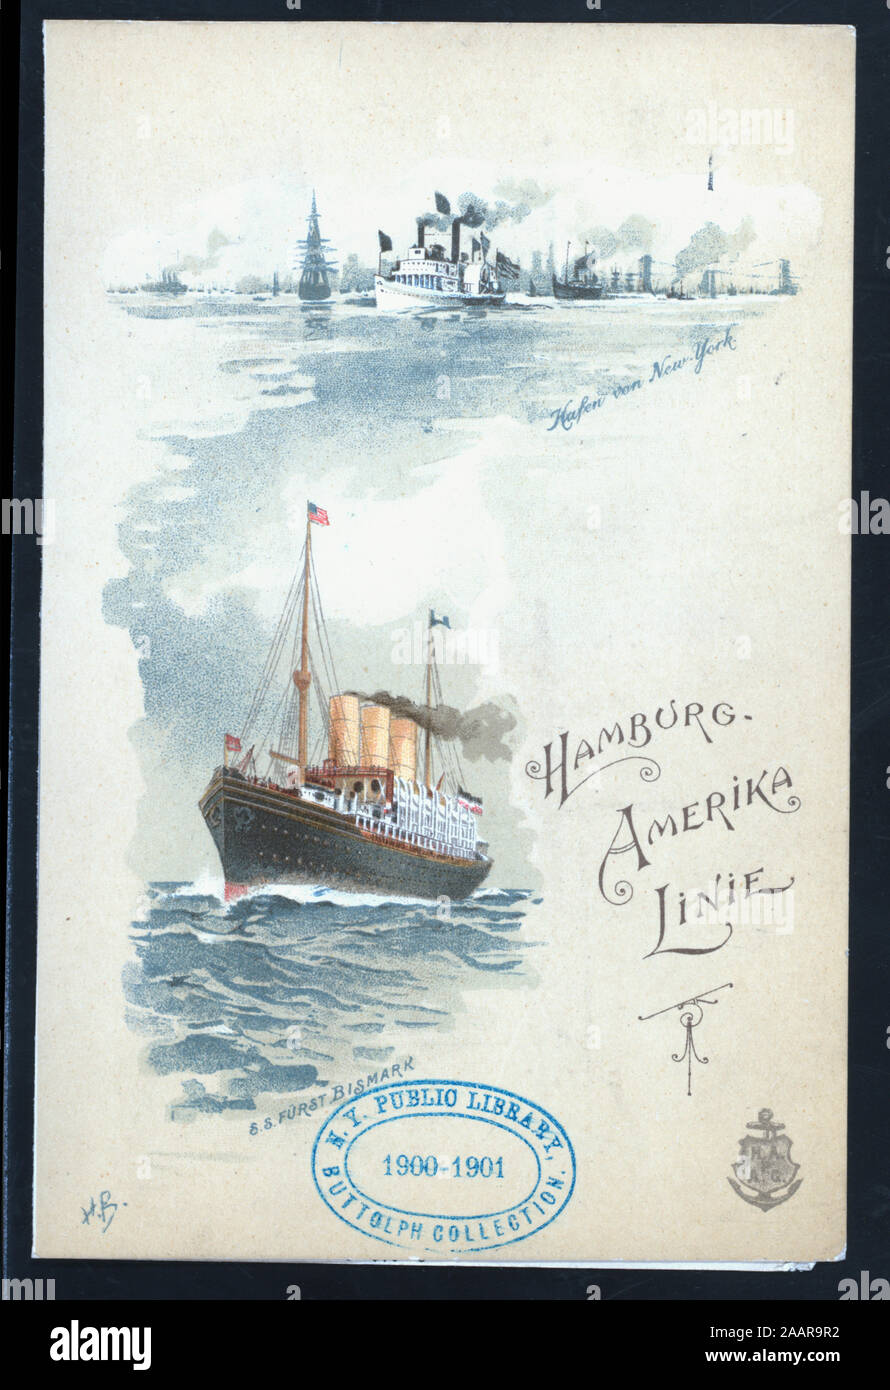 DINNER (held by) HAMBURG-AMERIKA LINIE (at) SS AUGUSTE VICTORIA (SS;) SEPARATE GERMAN AND ENGLISH MENU LISTINGS;MUSICAL PROGRAM;NUMEROUS ILLUSTRATIONS 1900-2651; DINNER [held by] HAMBURG-AMERIKA LINIE [at] SS AUGUSTE VICTORIA (SS;) Stock Photo